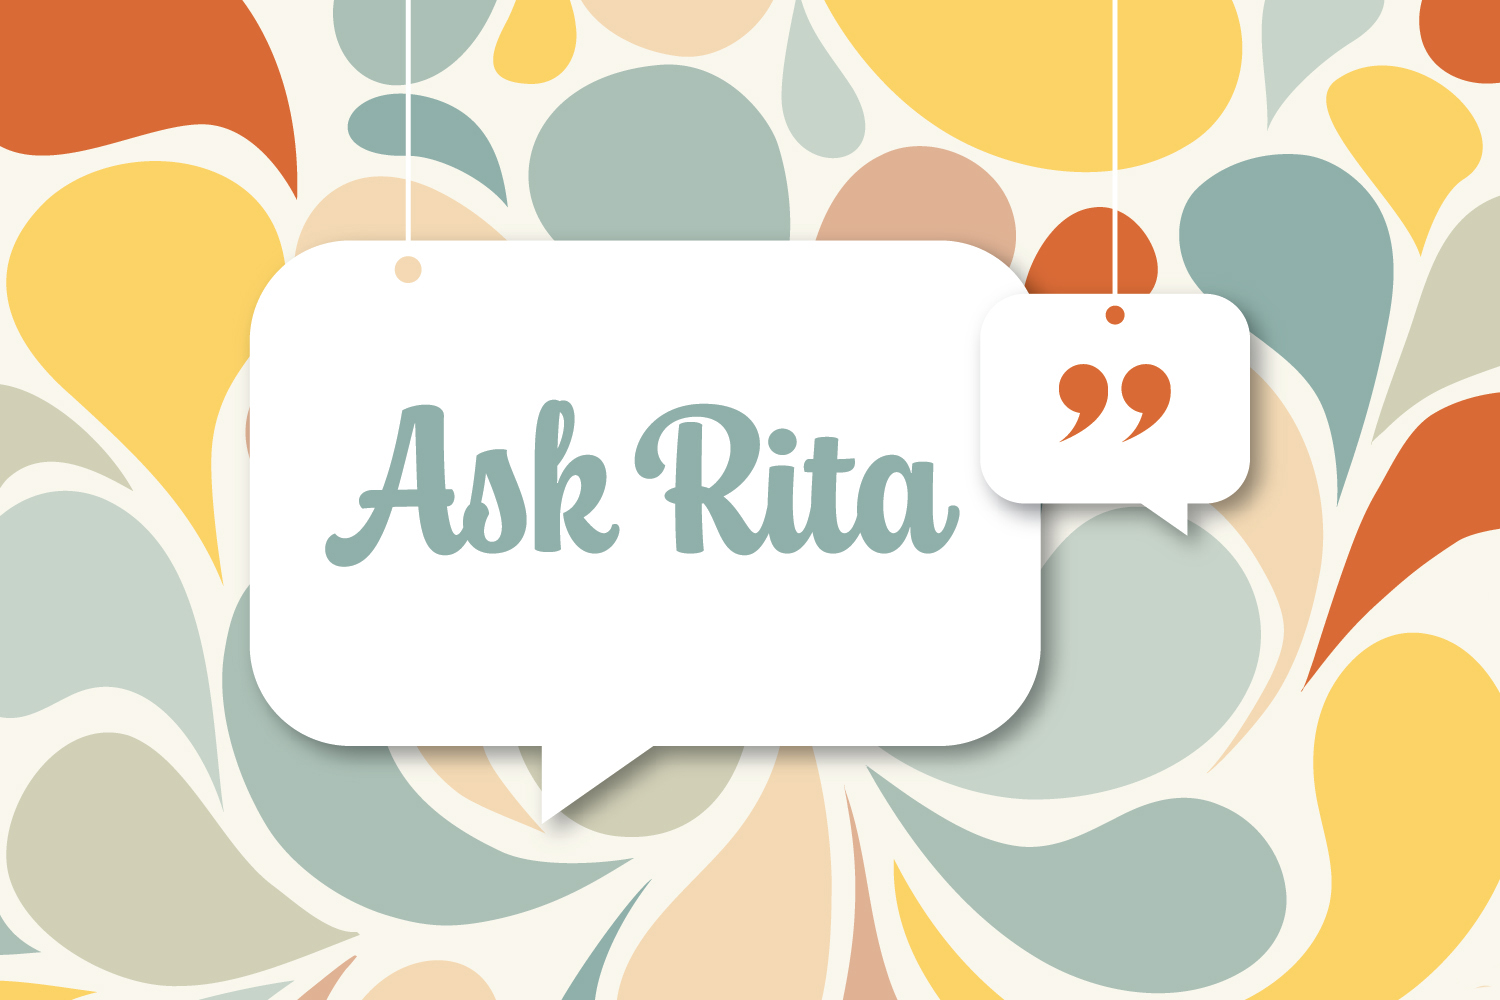 Ask Rita: Can an Employee Come and Go Using Family or Medical Leave?